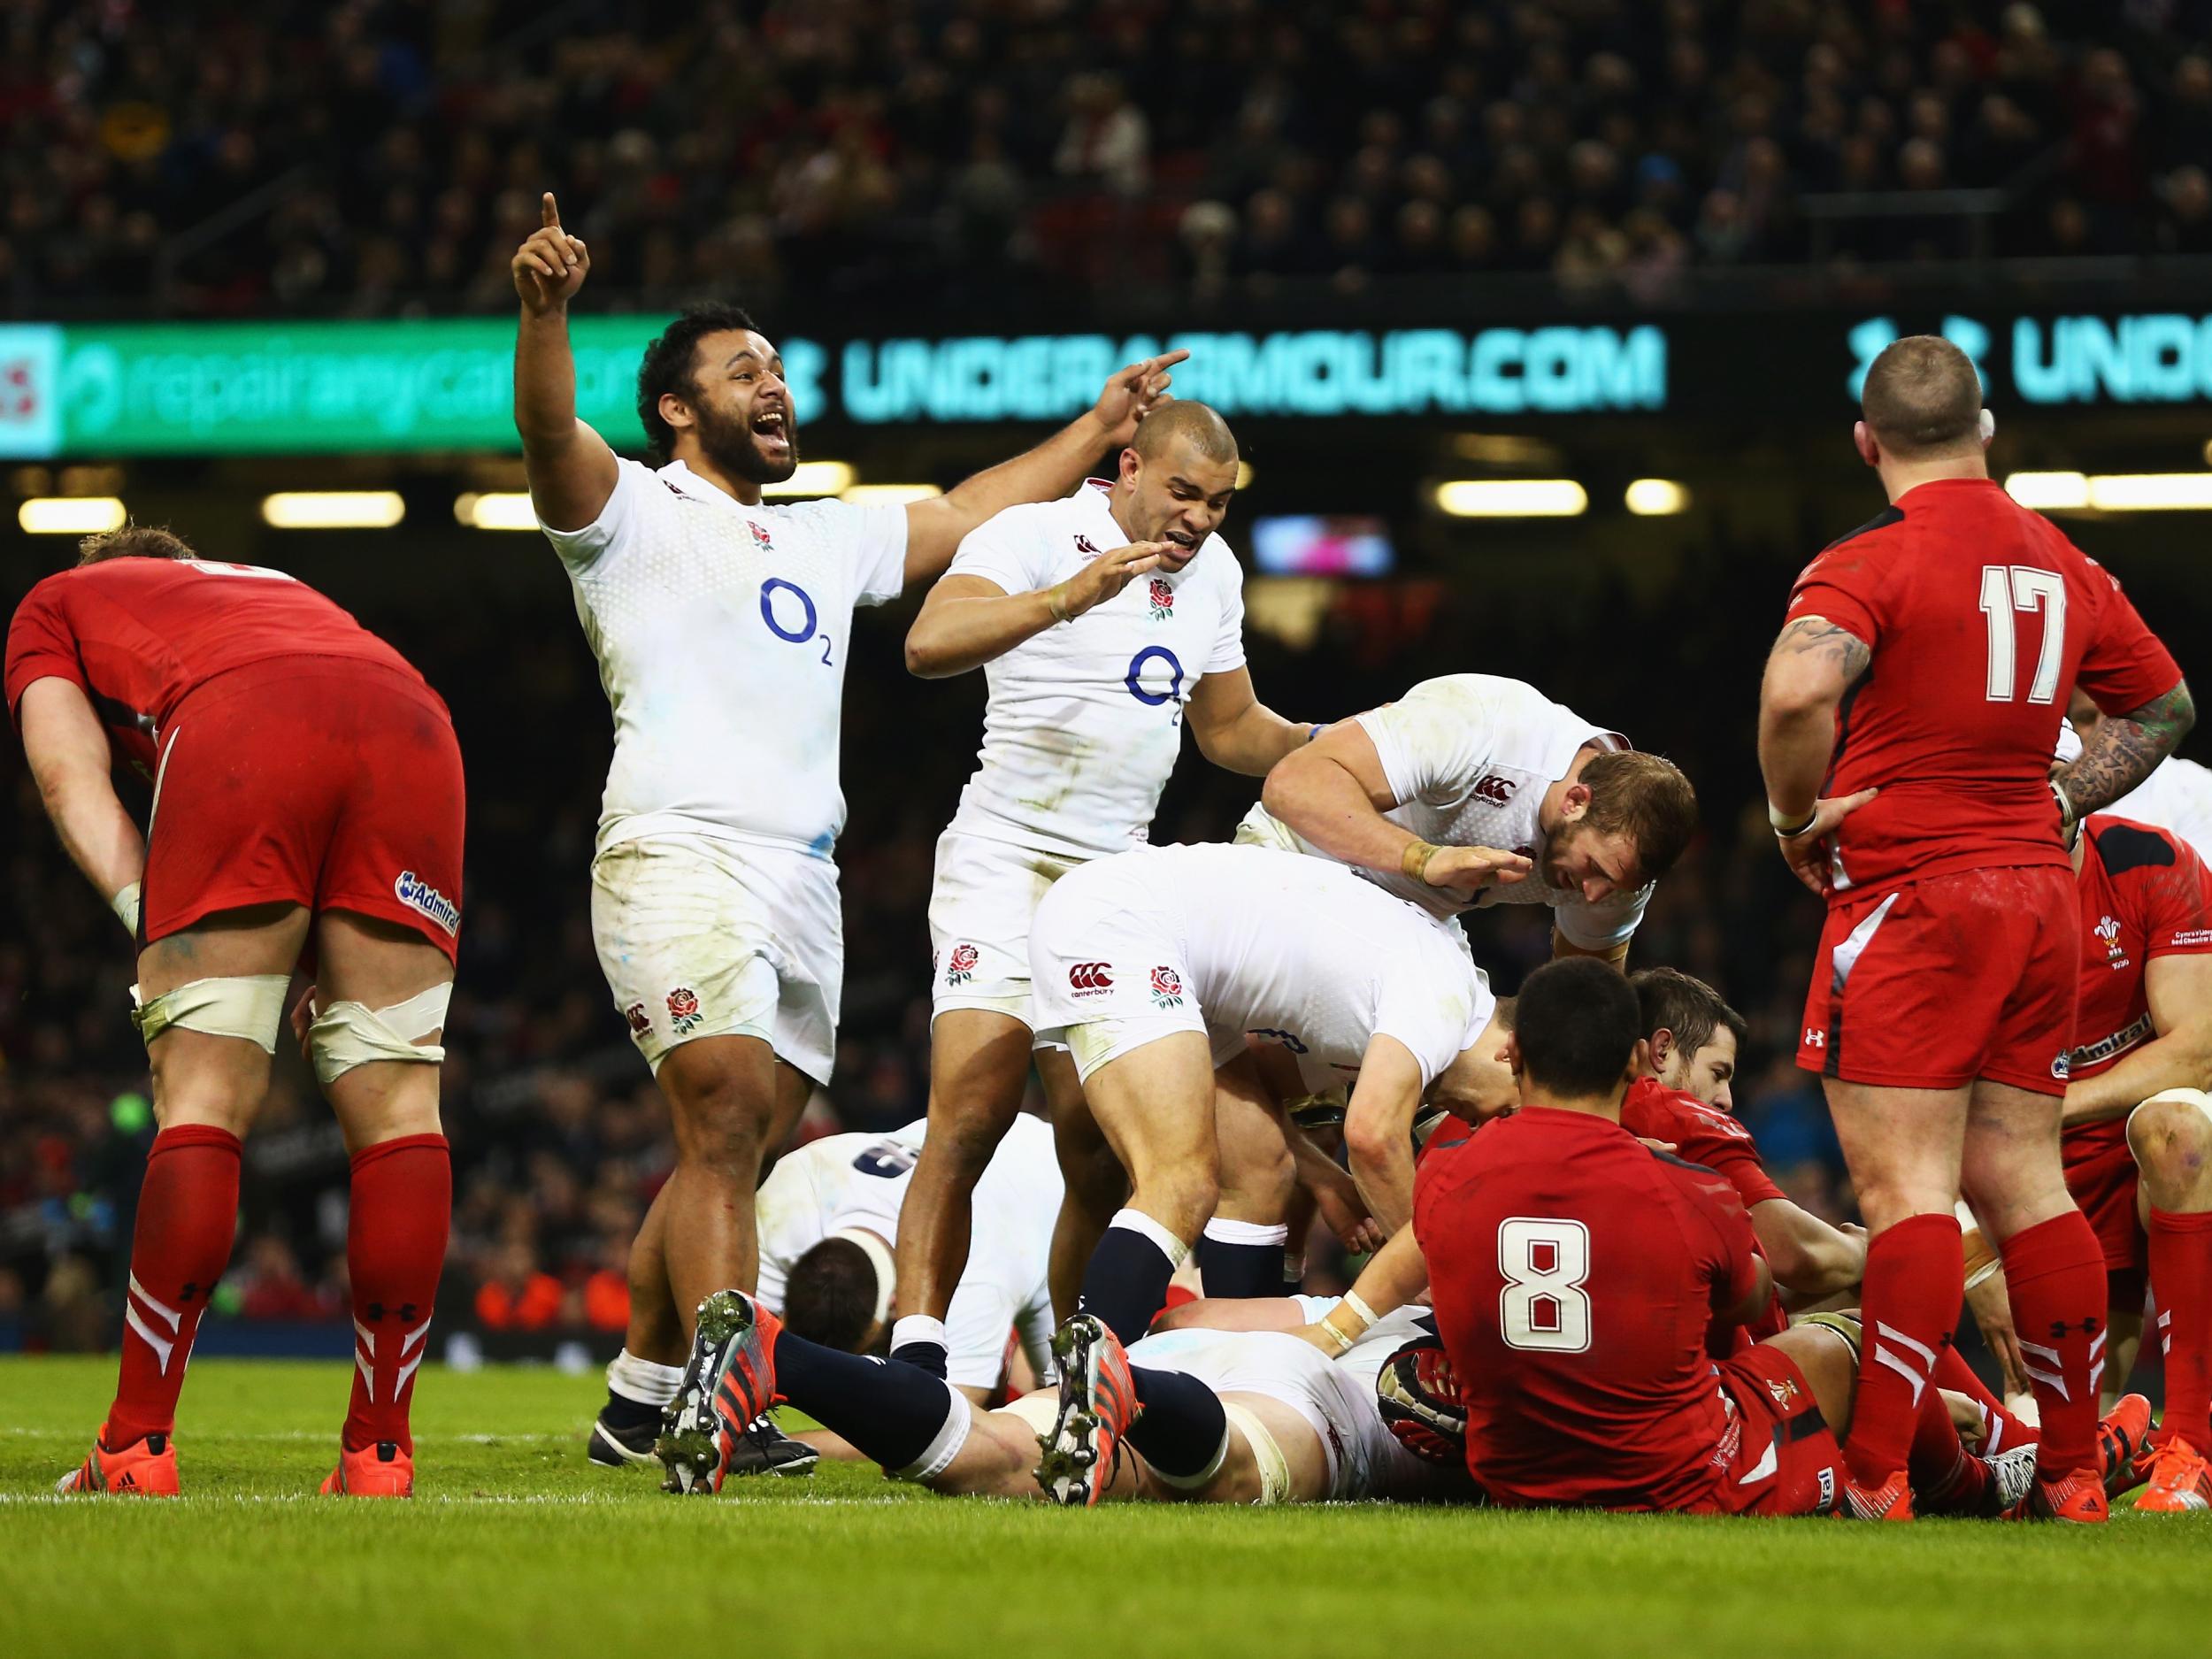 England won the last time the two sides met in a Six Nations game in Cardiff